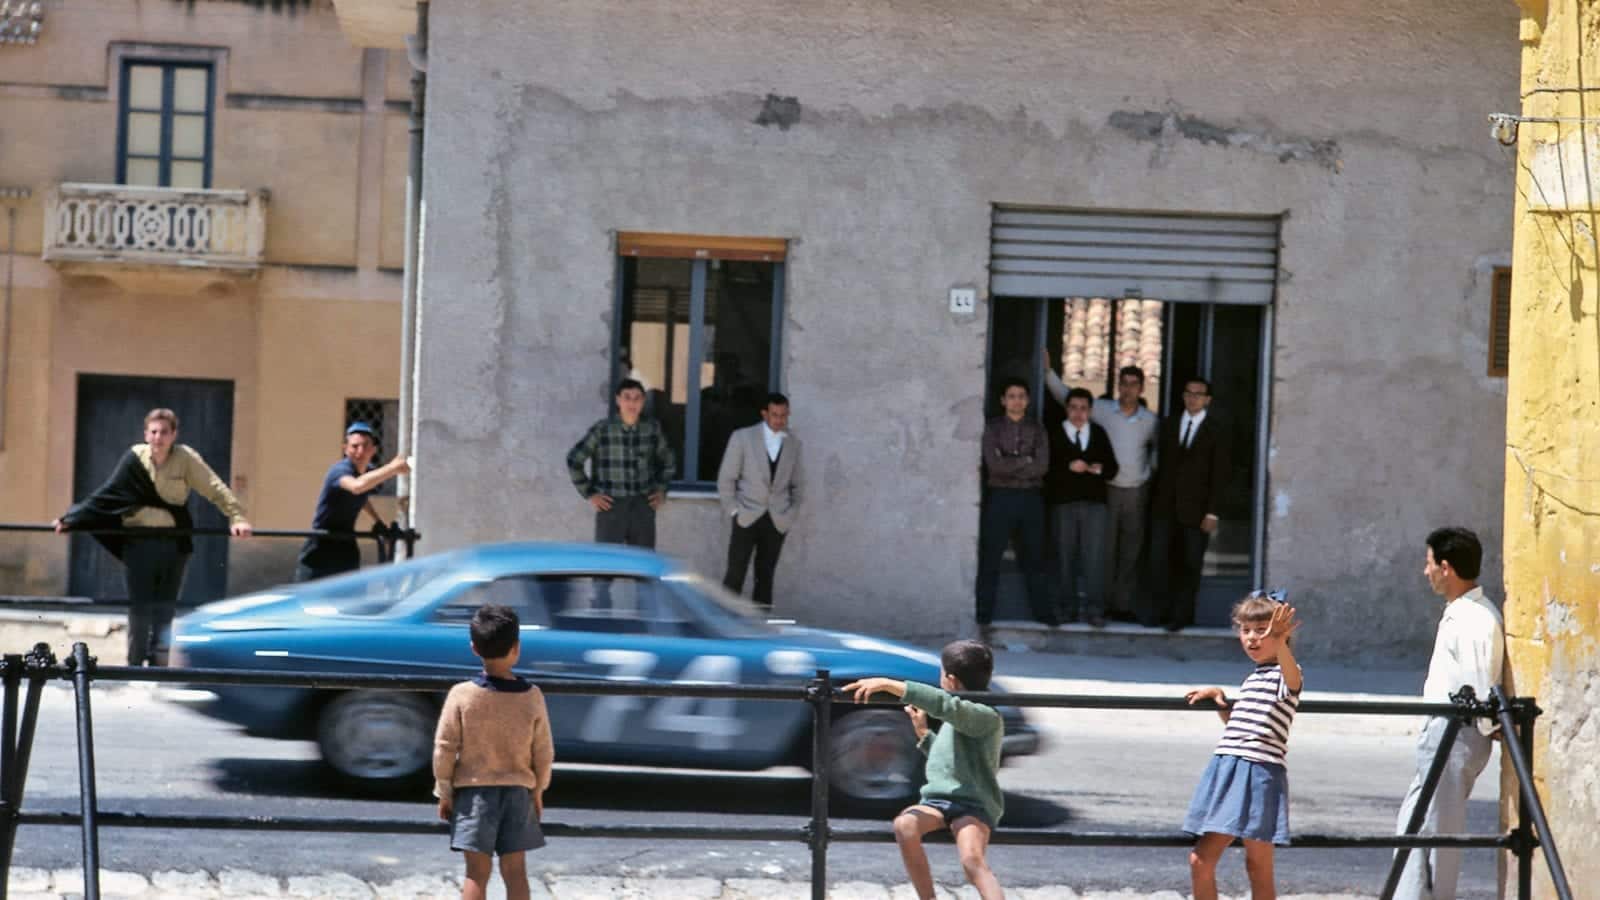 Crowds watch the Alpine A110 of Jean-Pierre Hanrioud and Jean-Francois Piot on the 1966 Targa Florio